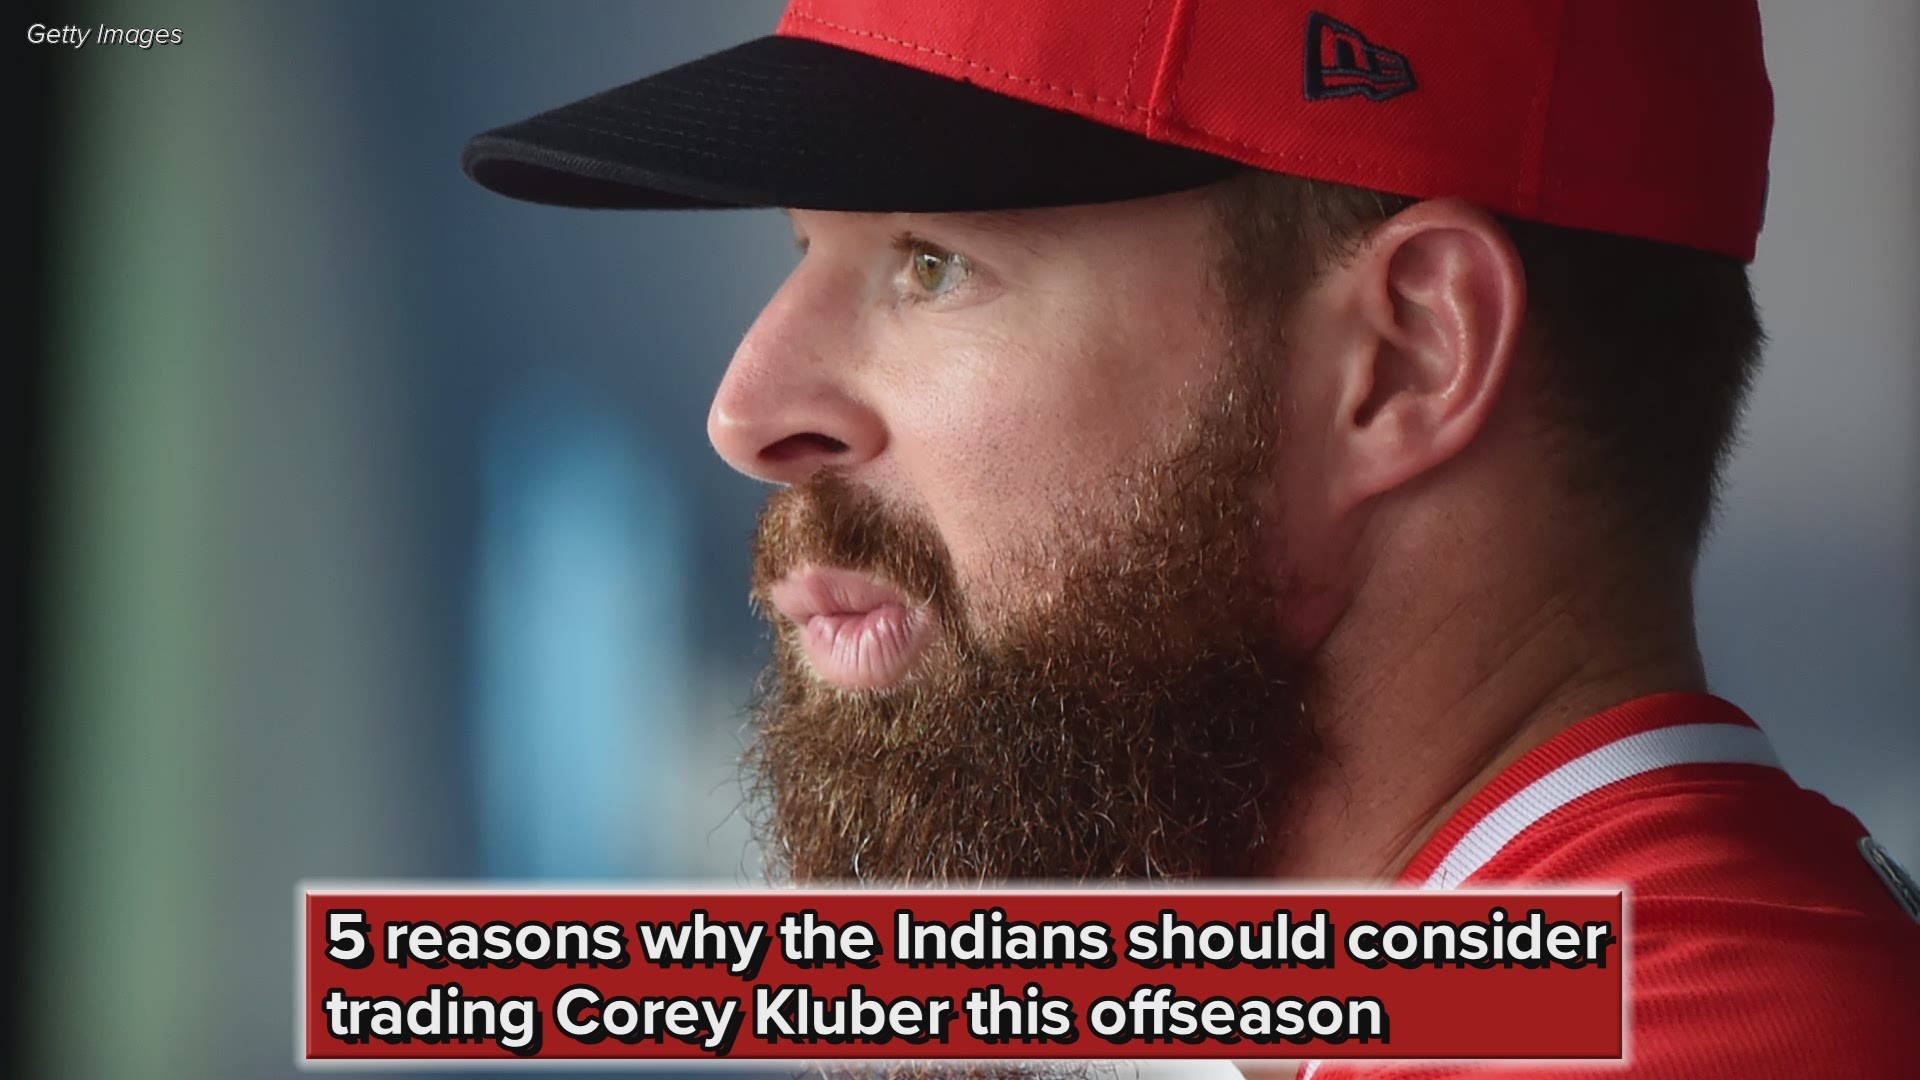 5 reasons why the Cleveland Indians should consider trading Corey Kluber this offseason